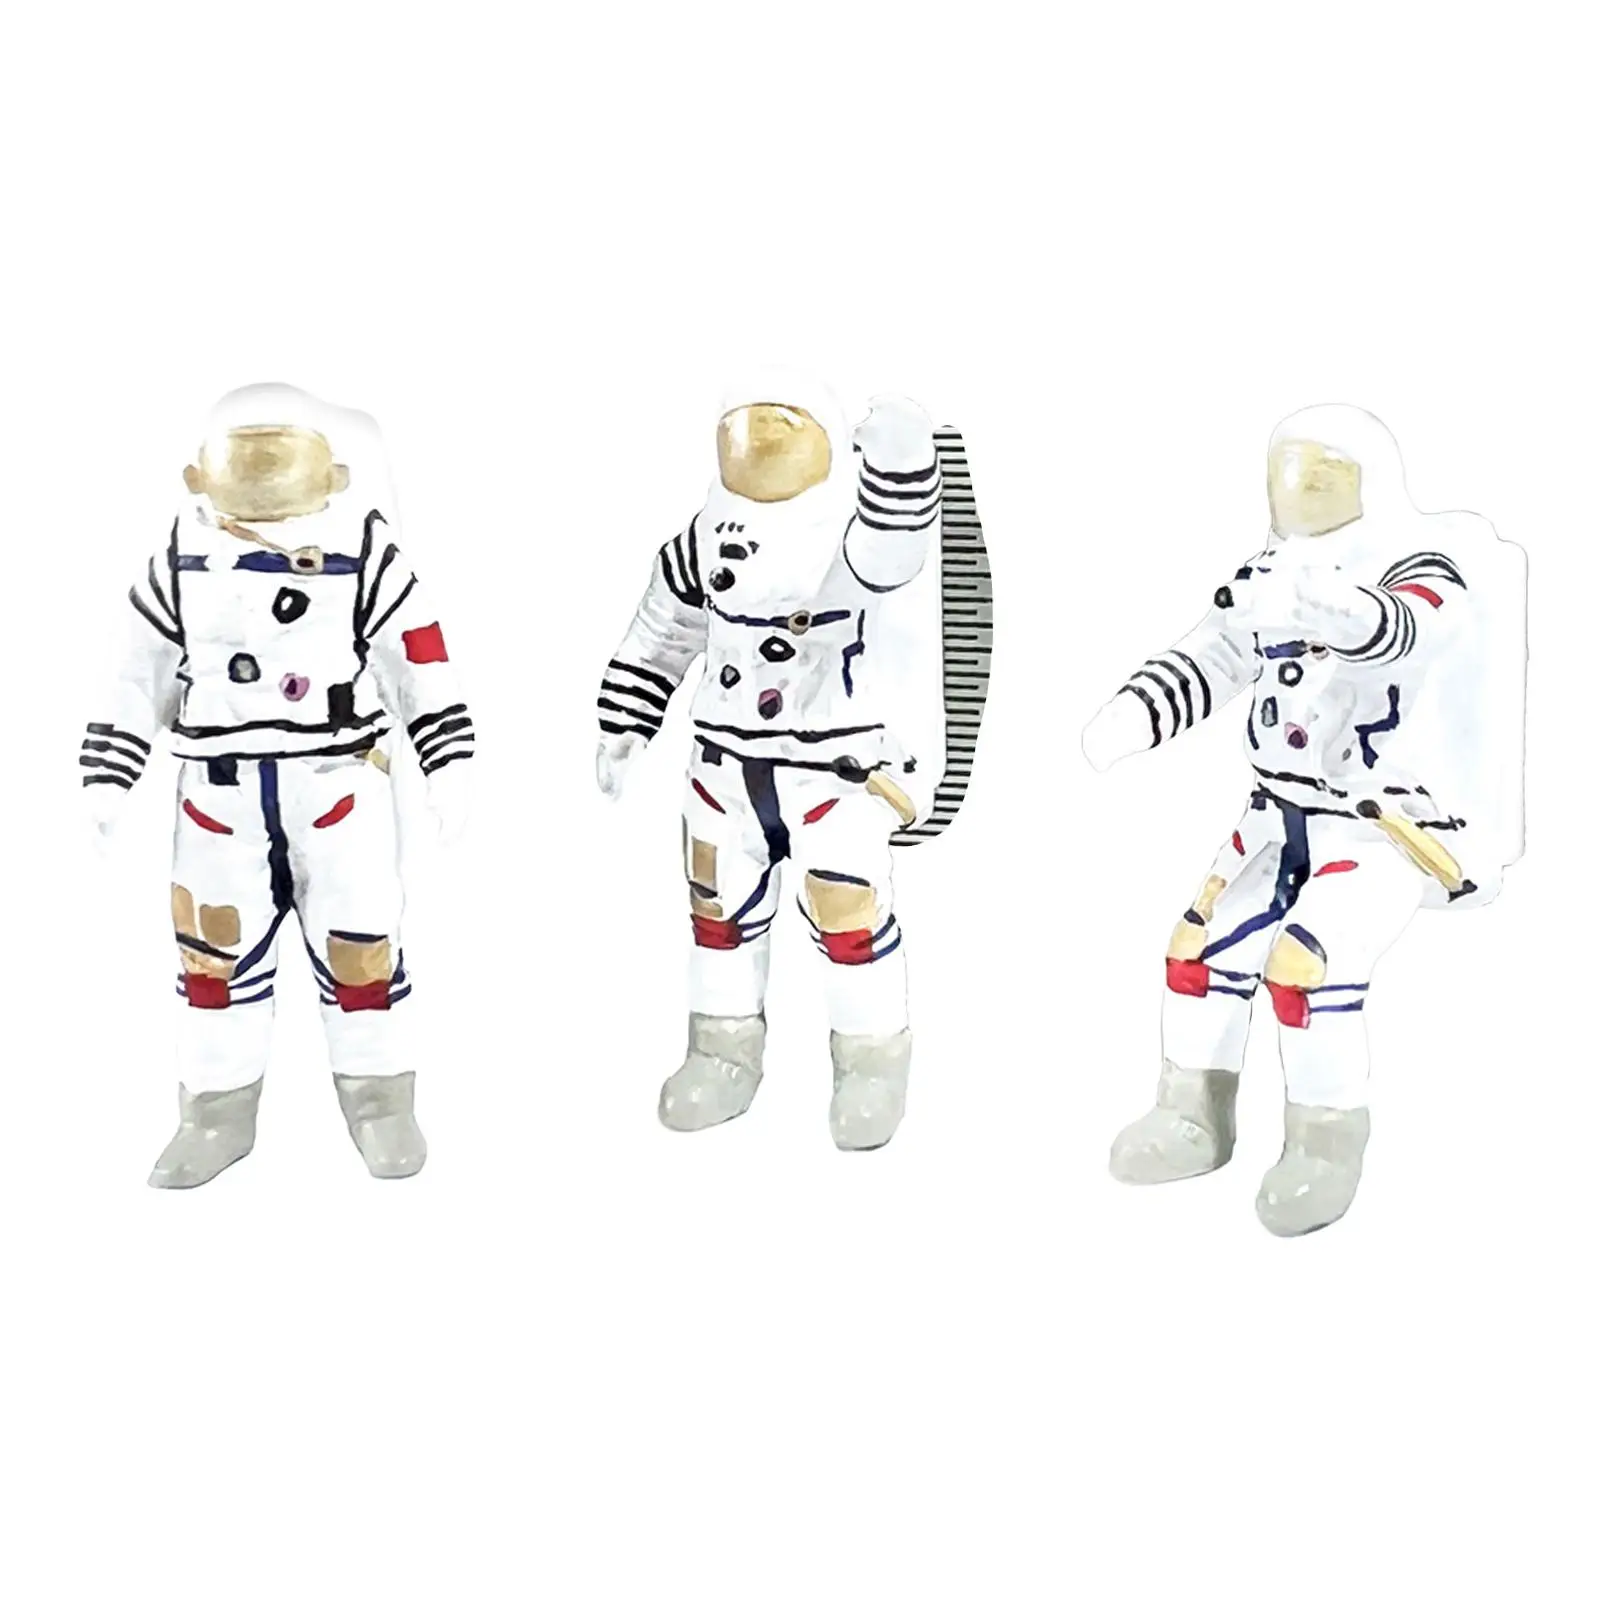 1/64 Scale Astronaut Figurines Mini Astronaut Toys,Spaceman Model for Photography Props